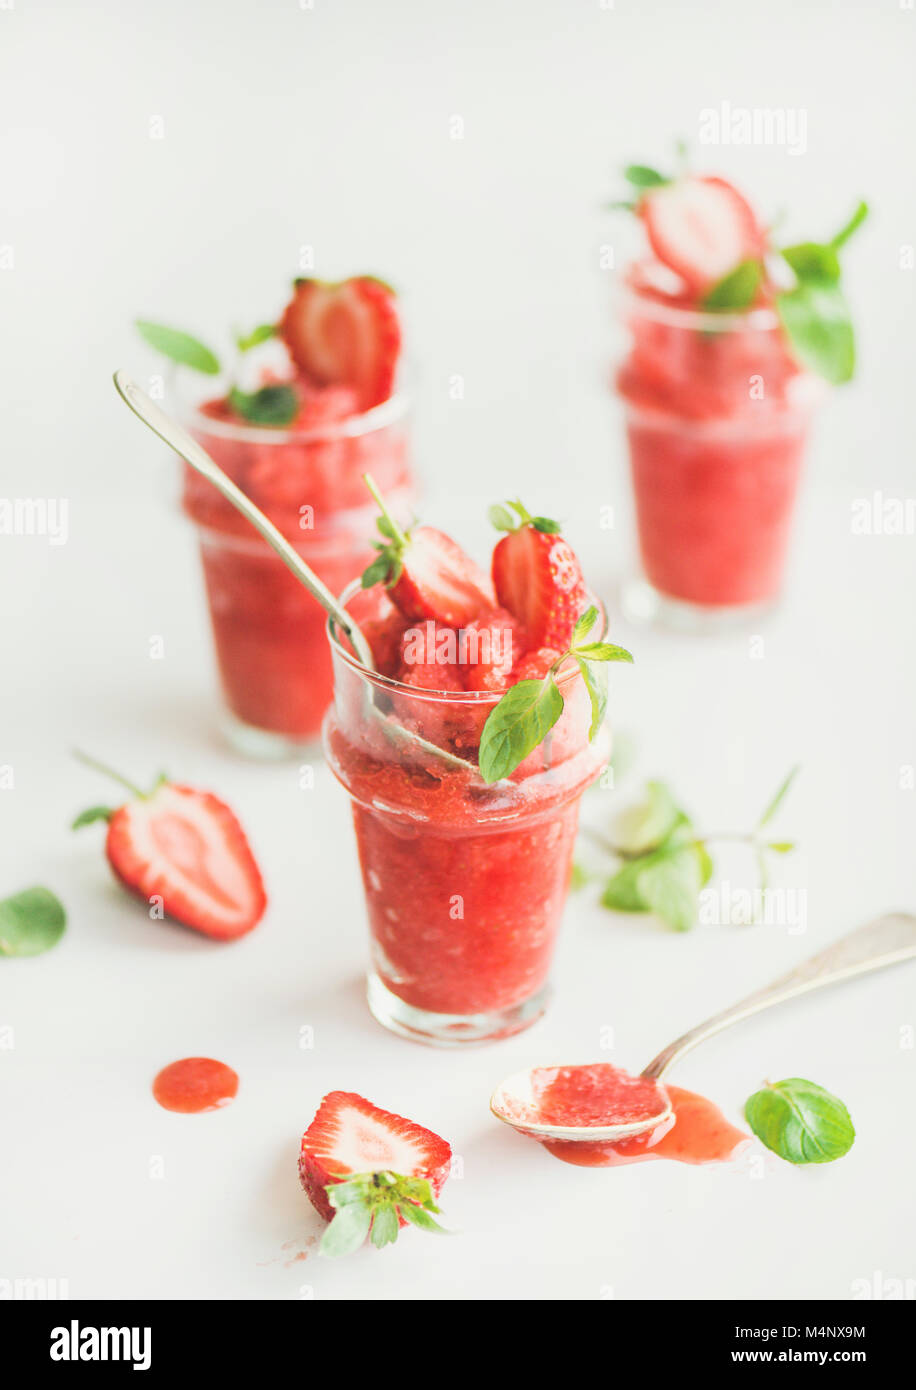 Healthy low calorie summer treat. Strawberry and champaigne granita, slushie or shaved ice dessert in glasses with mint, white background. Clean eatin Stock Photo